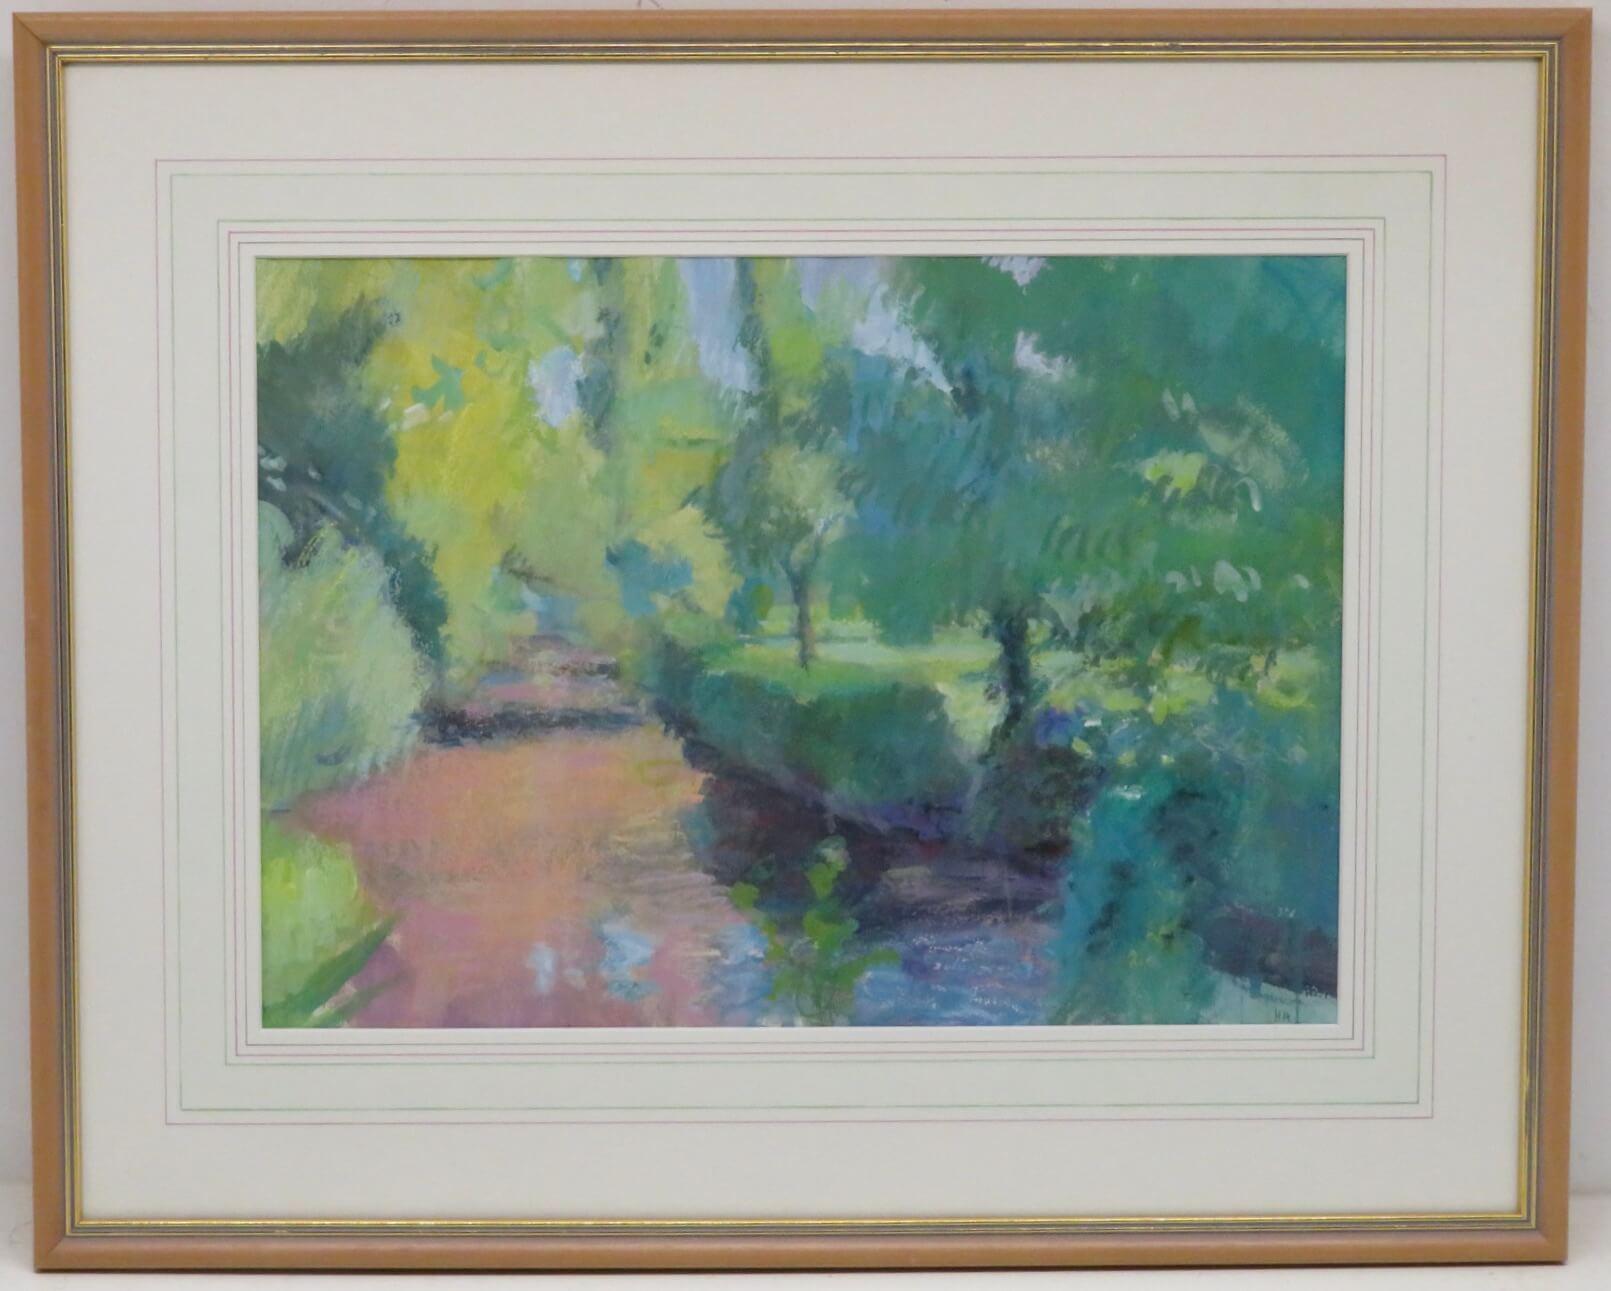 English Post Impressionist 20thC painting SUMMER RIVERBANK indistinctly signed